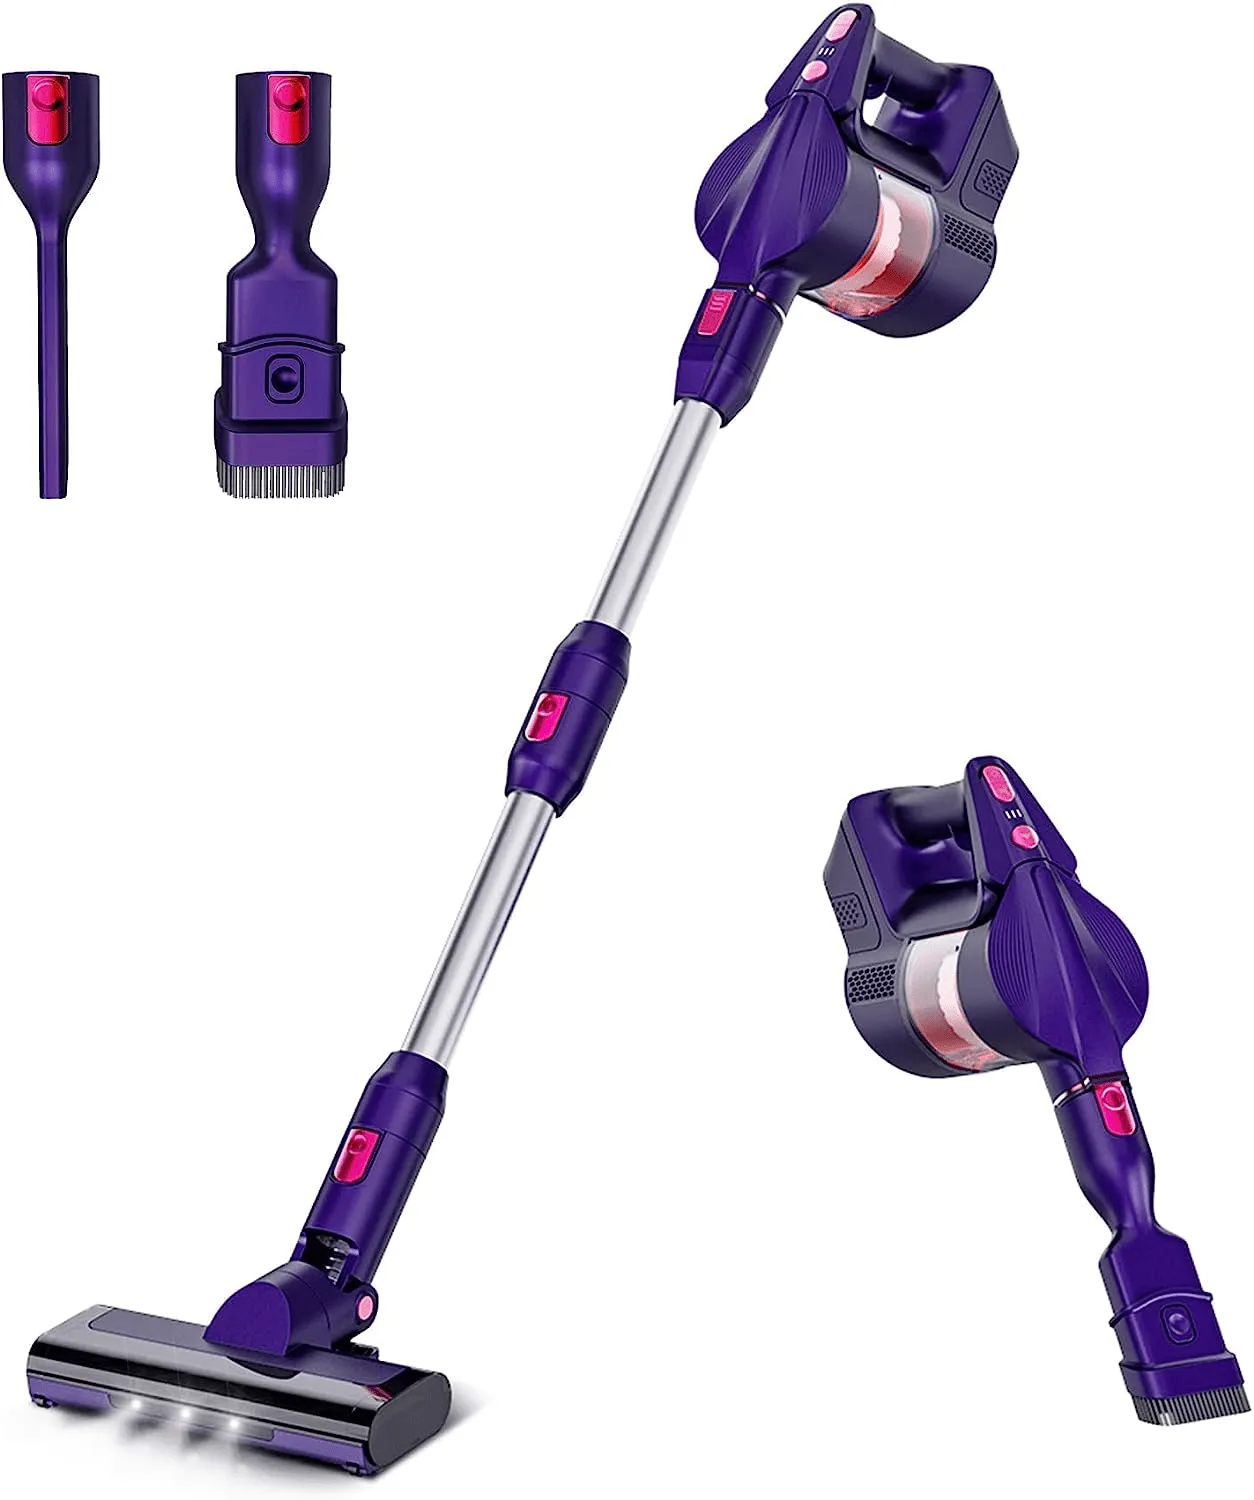 Powerful Suction Stick Vacuum Cleaner